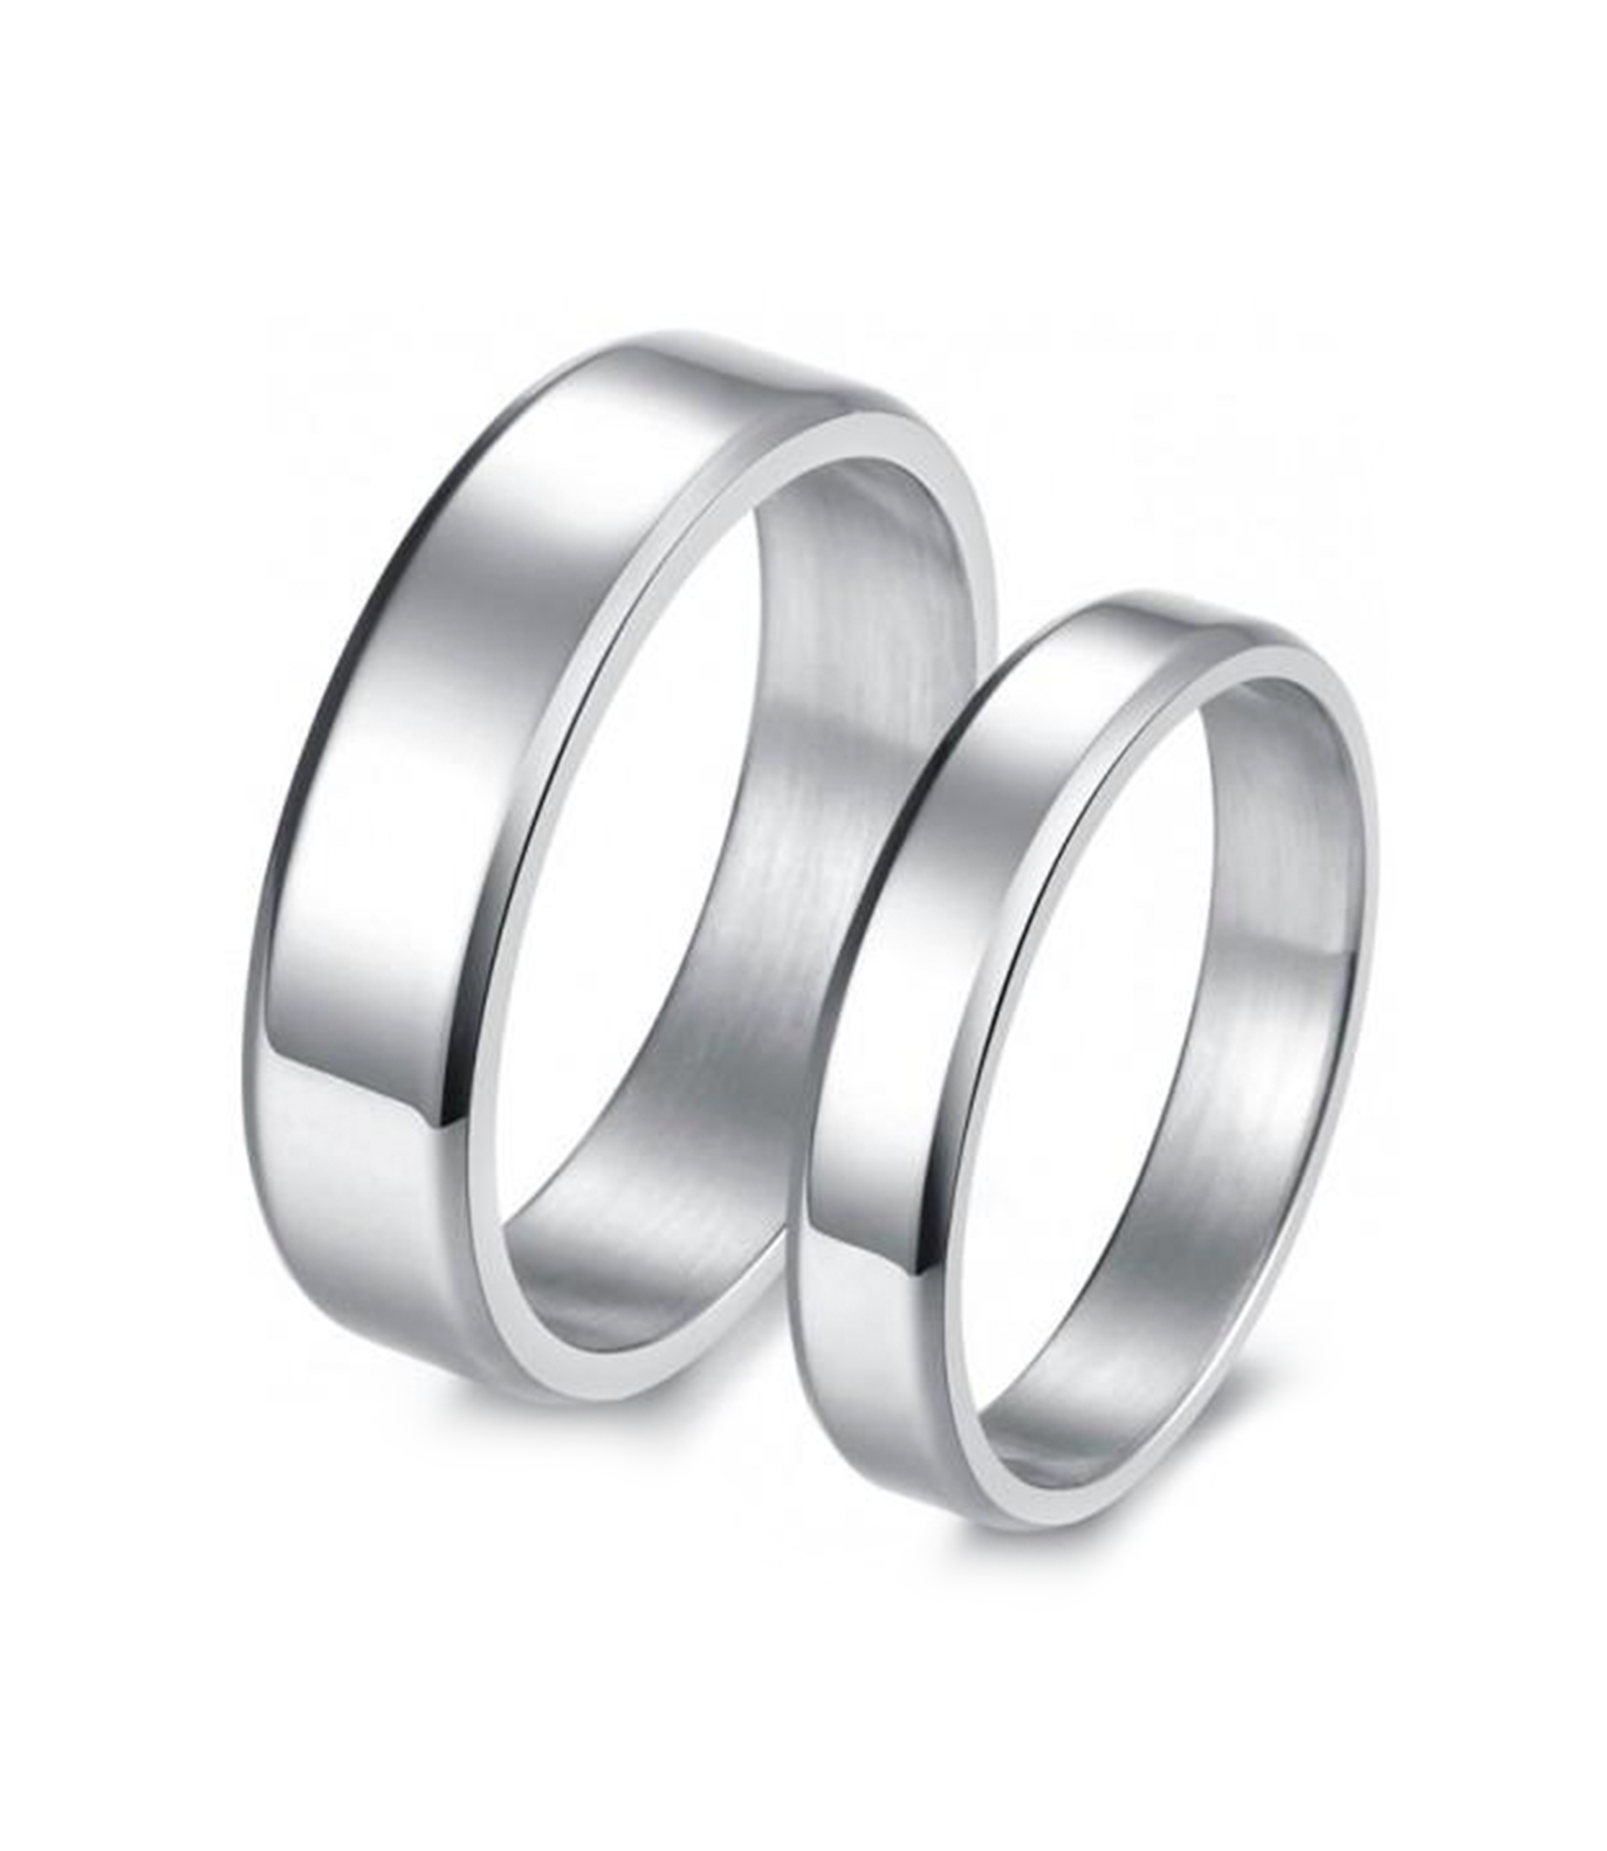 9 Beautiful Designed Wedding Rings for Couples